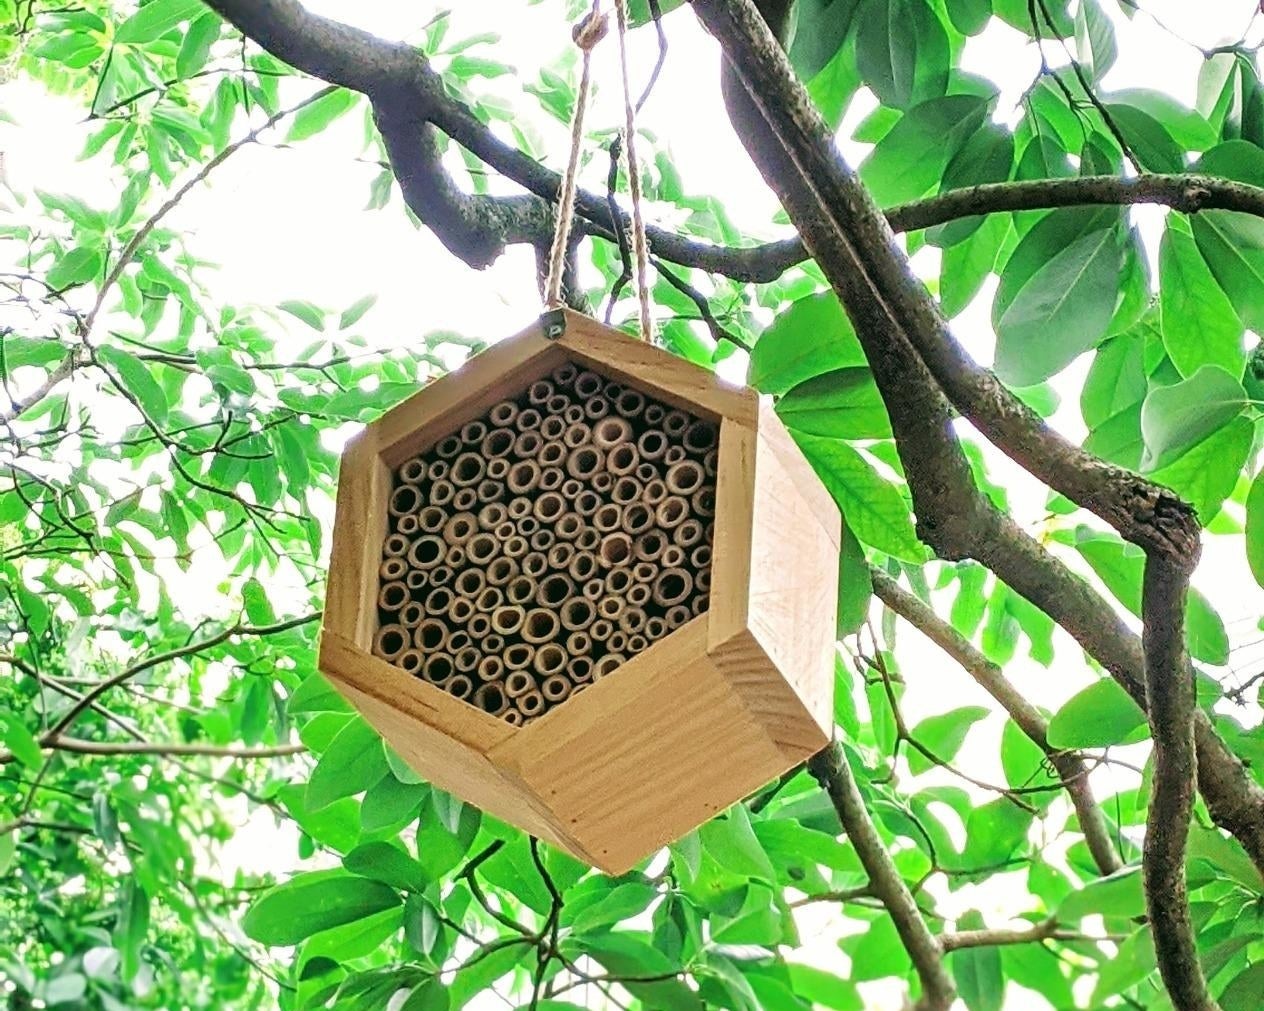 Reviewer photo of the bee house, which is made with pre-rolled tubes that give bees plenty of small places to nest